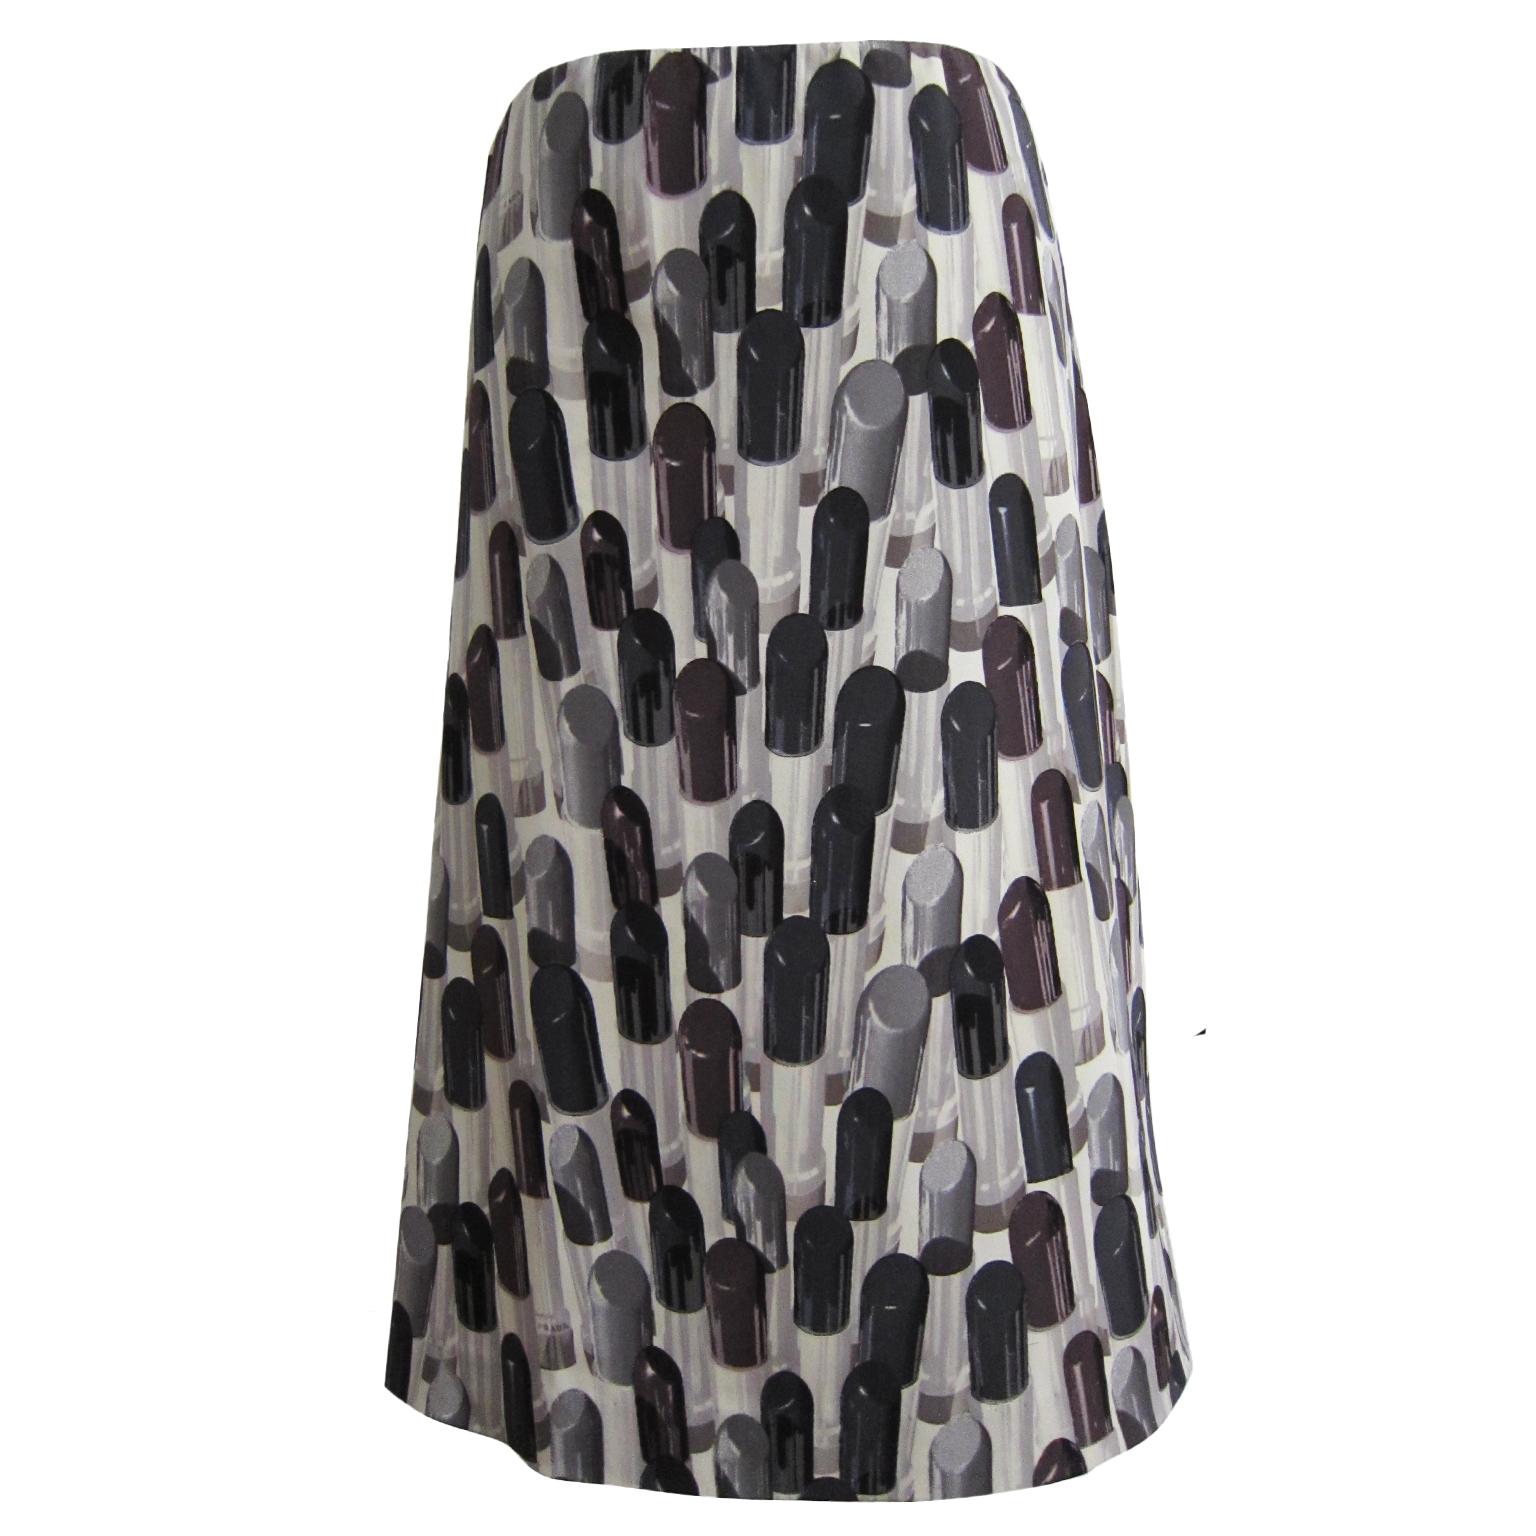 Prada grey black tone lipstick print silk base skirt from ss 2000 collection.
Rare & Collectable. 
Size : 38 (IT)
Measurements :
Waist : 70 cm
Length : 57 cm
